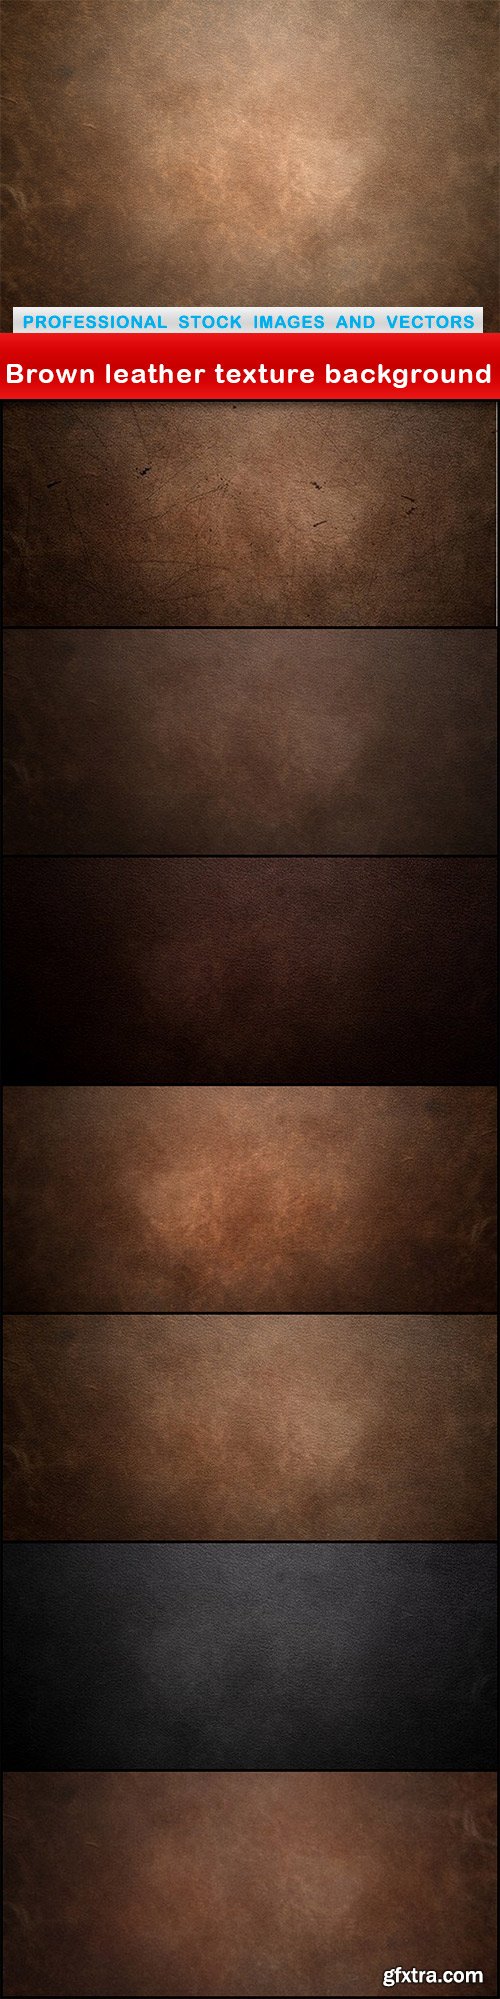 Brown leather texture background - 8 UHQ JPEG